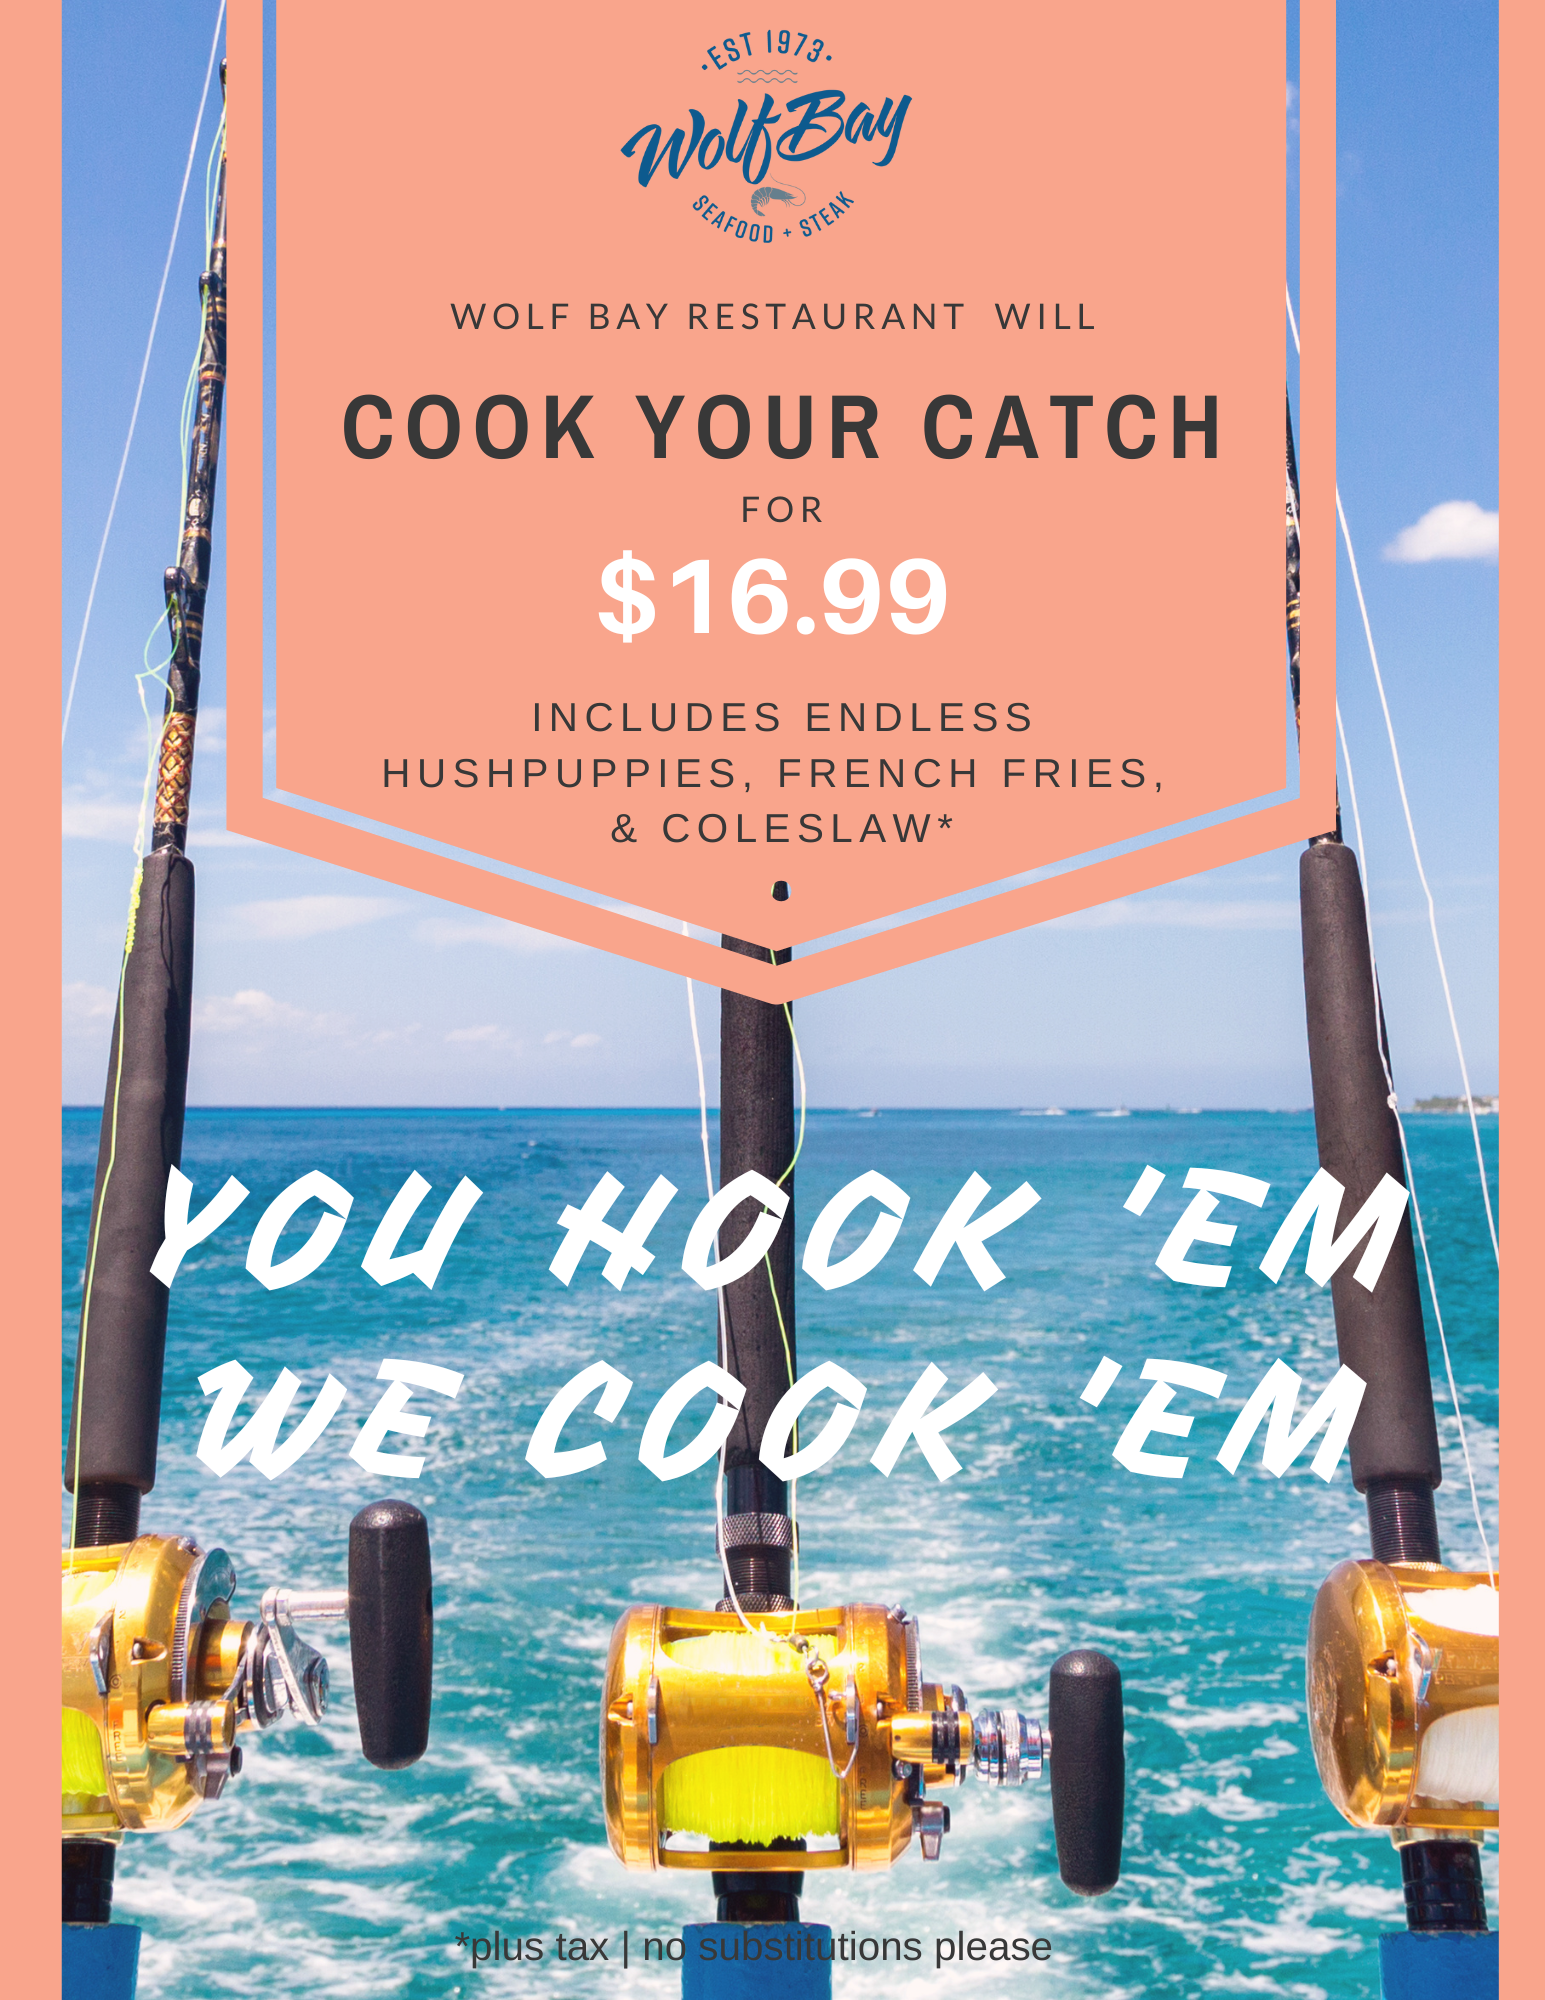 Wolf Bay will cook your fresh catch!